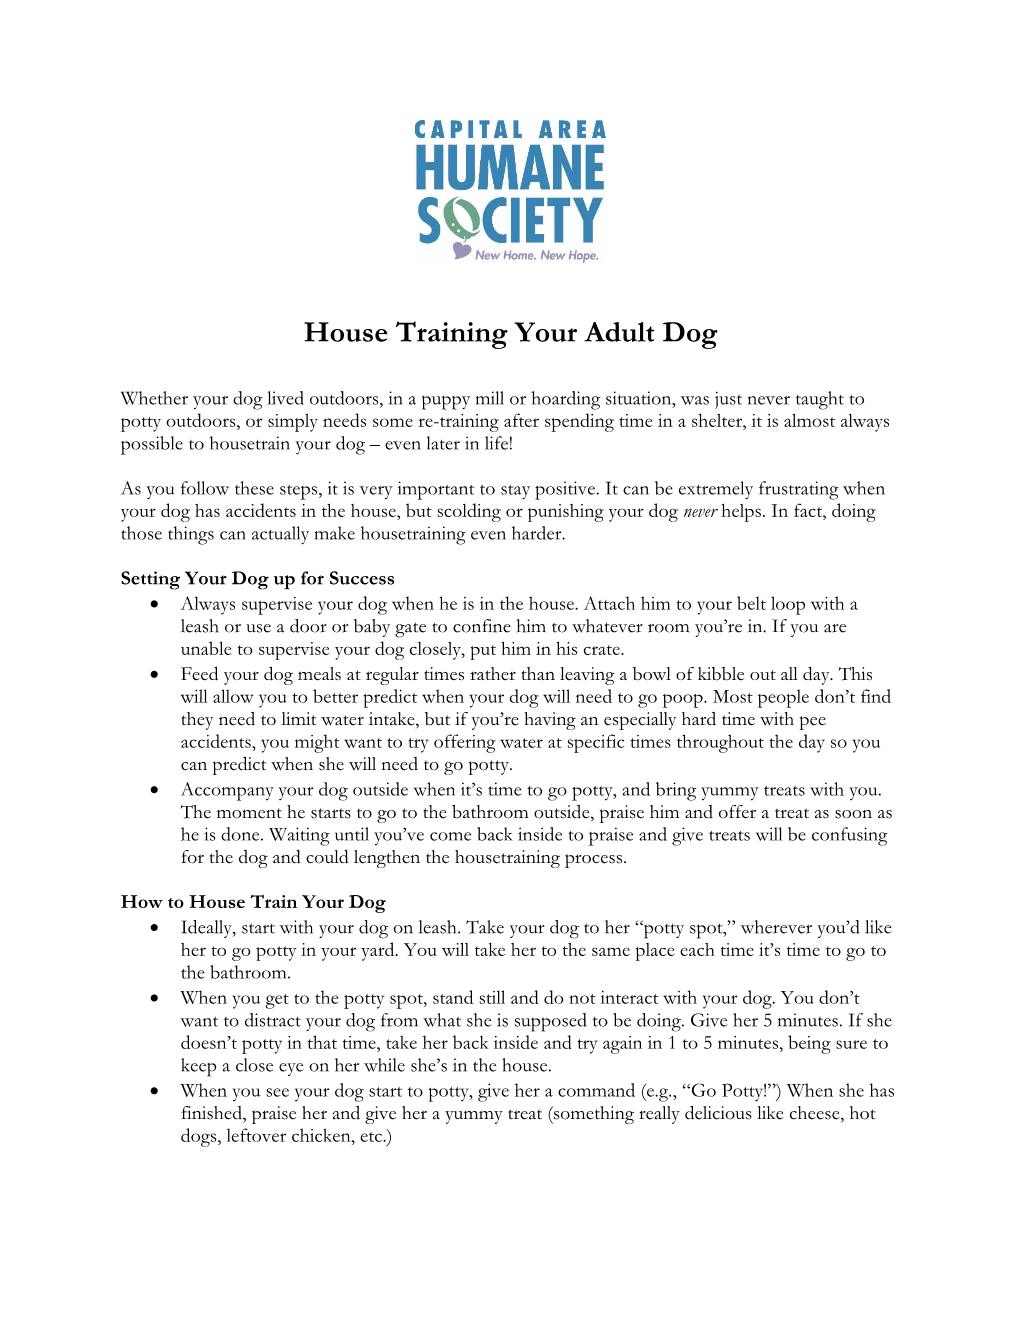 House Training Adult Dogs